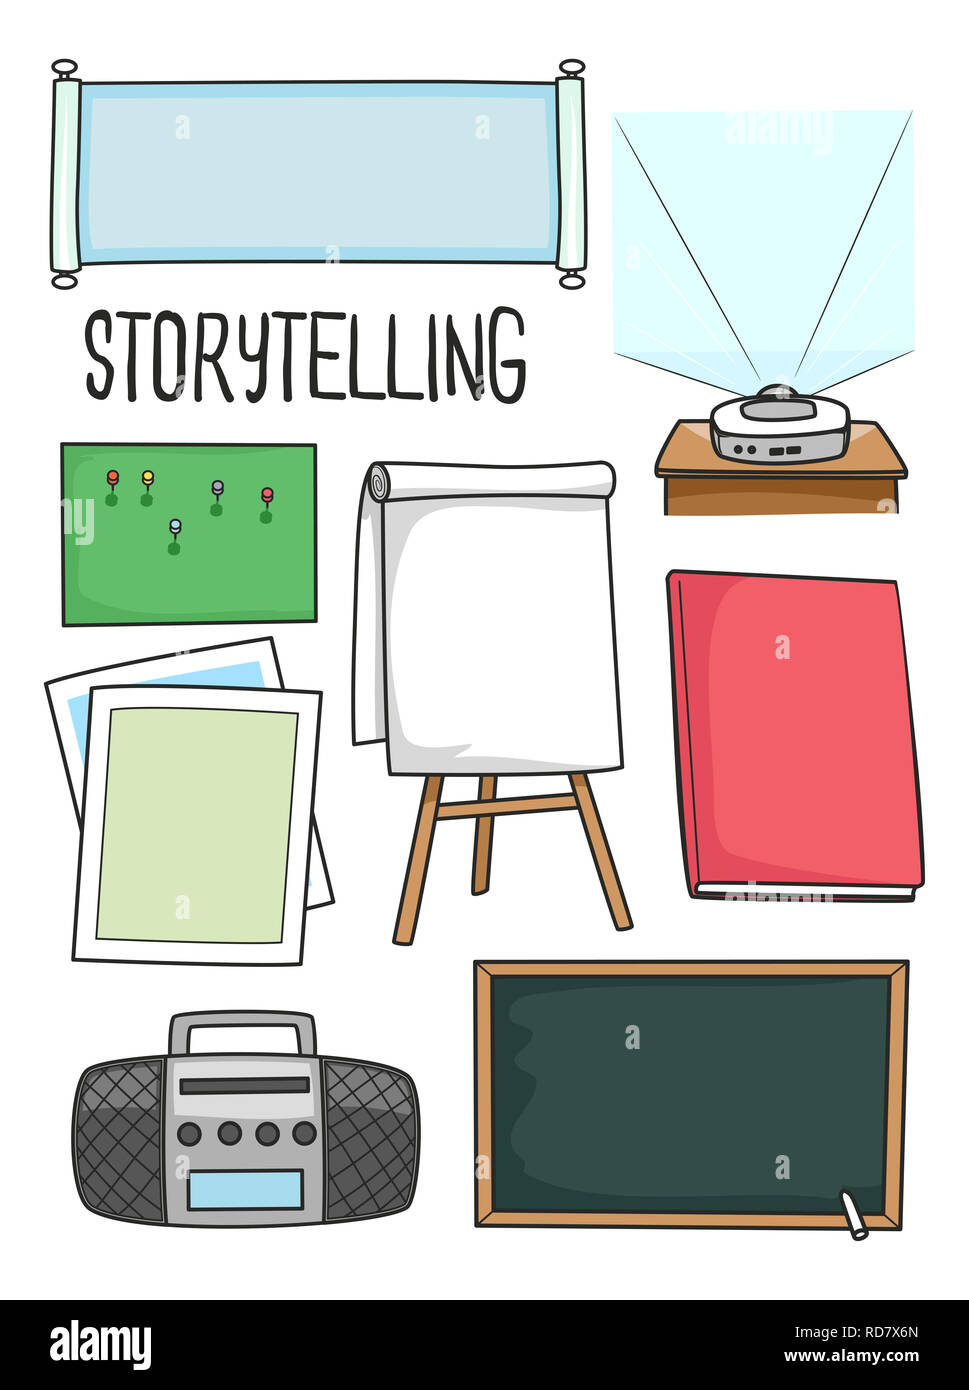 Illustration of Story Telling Materials Used in School from Scroll, Radio,  Blackboard, Projector and Book Stock Photo - Alamy